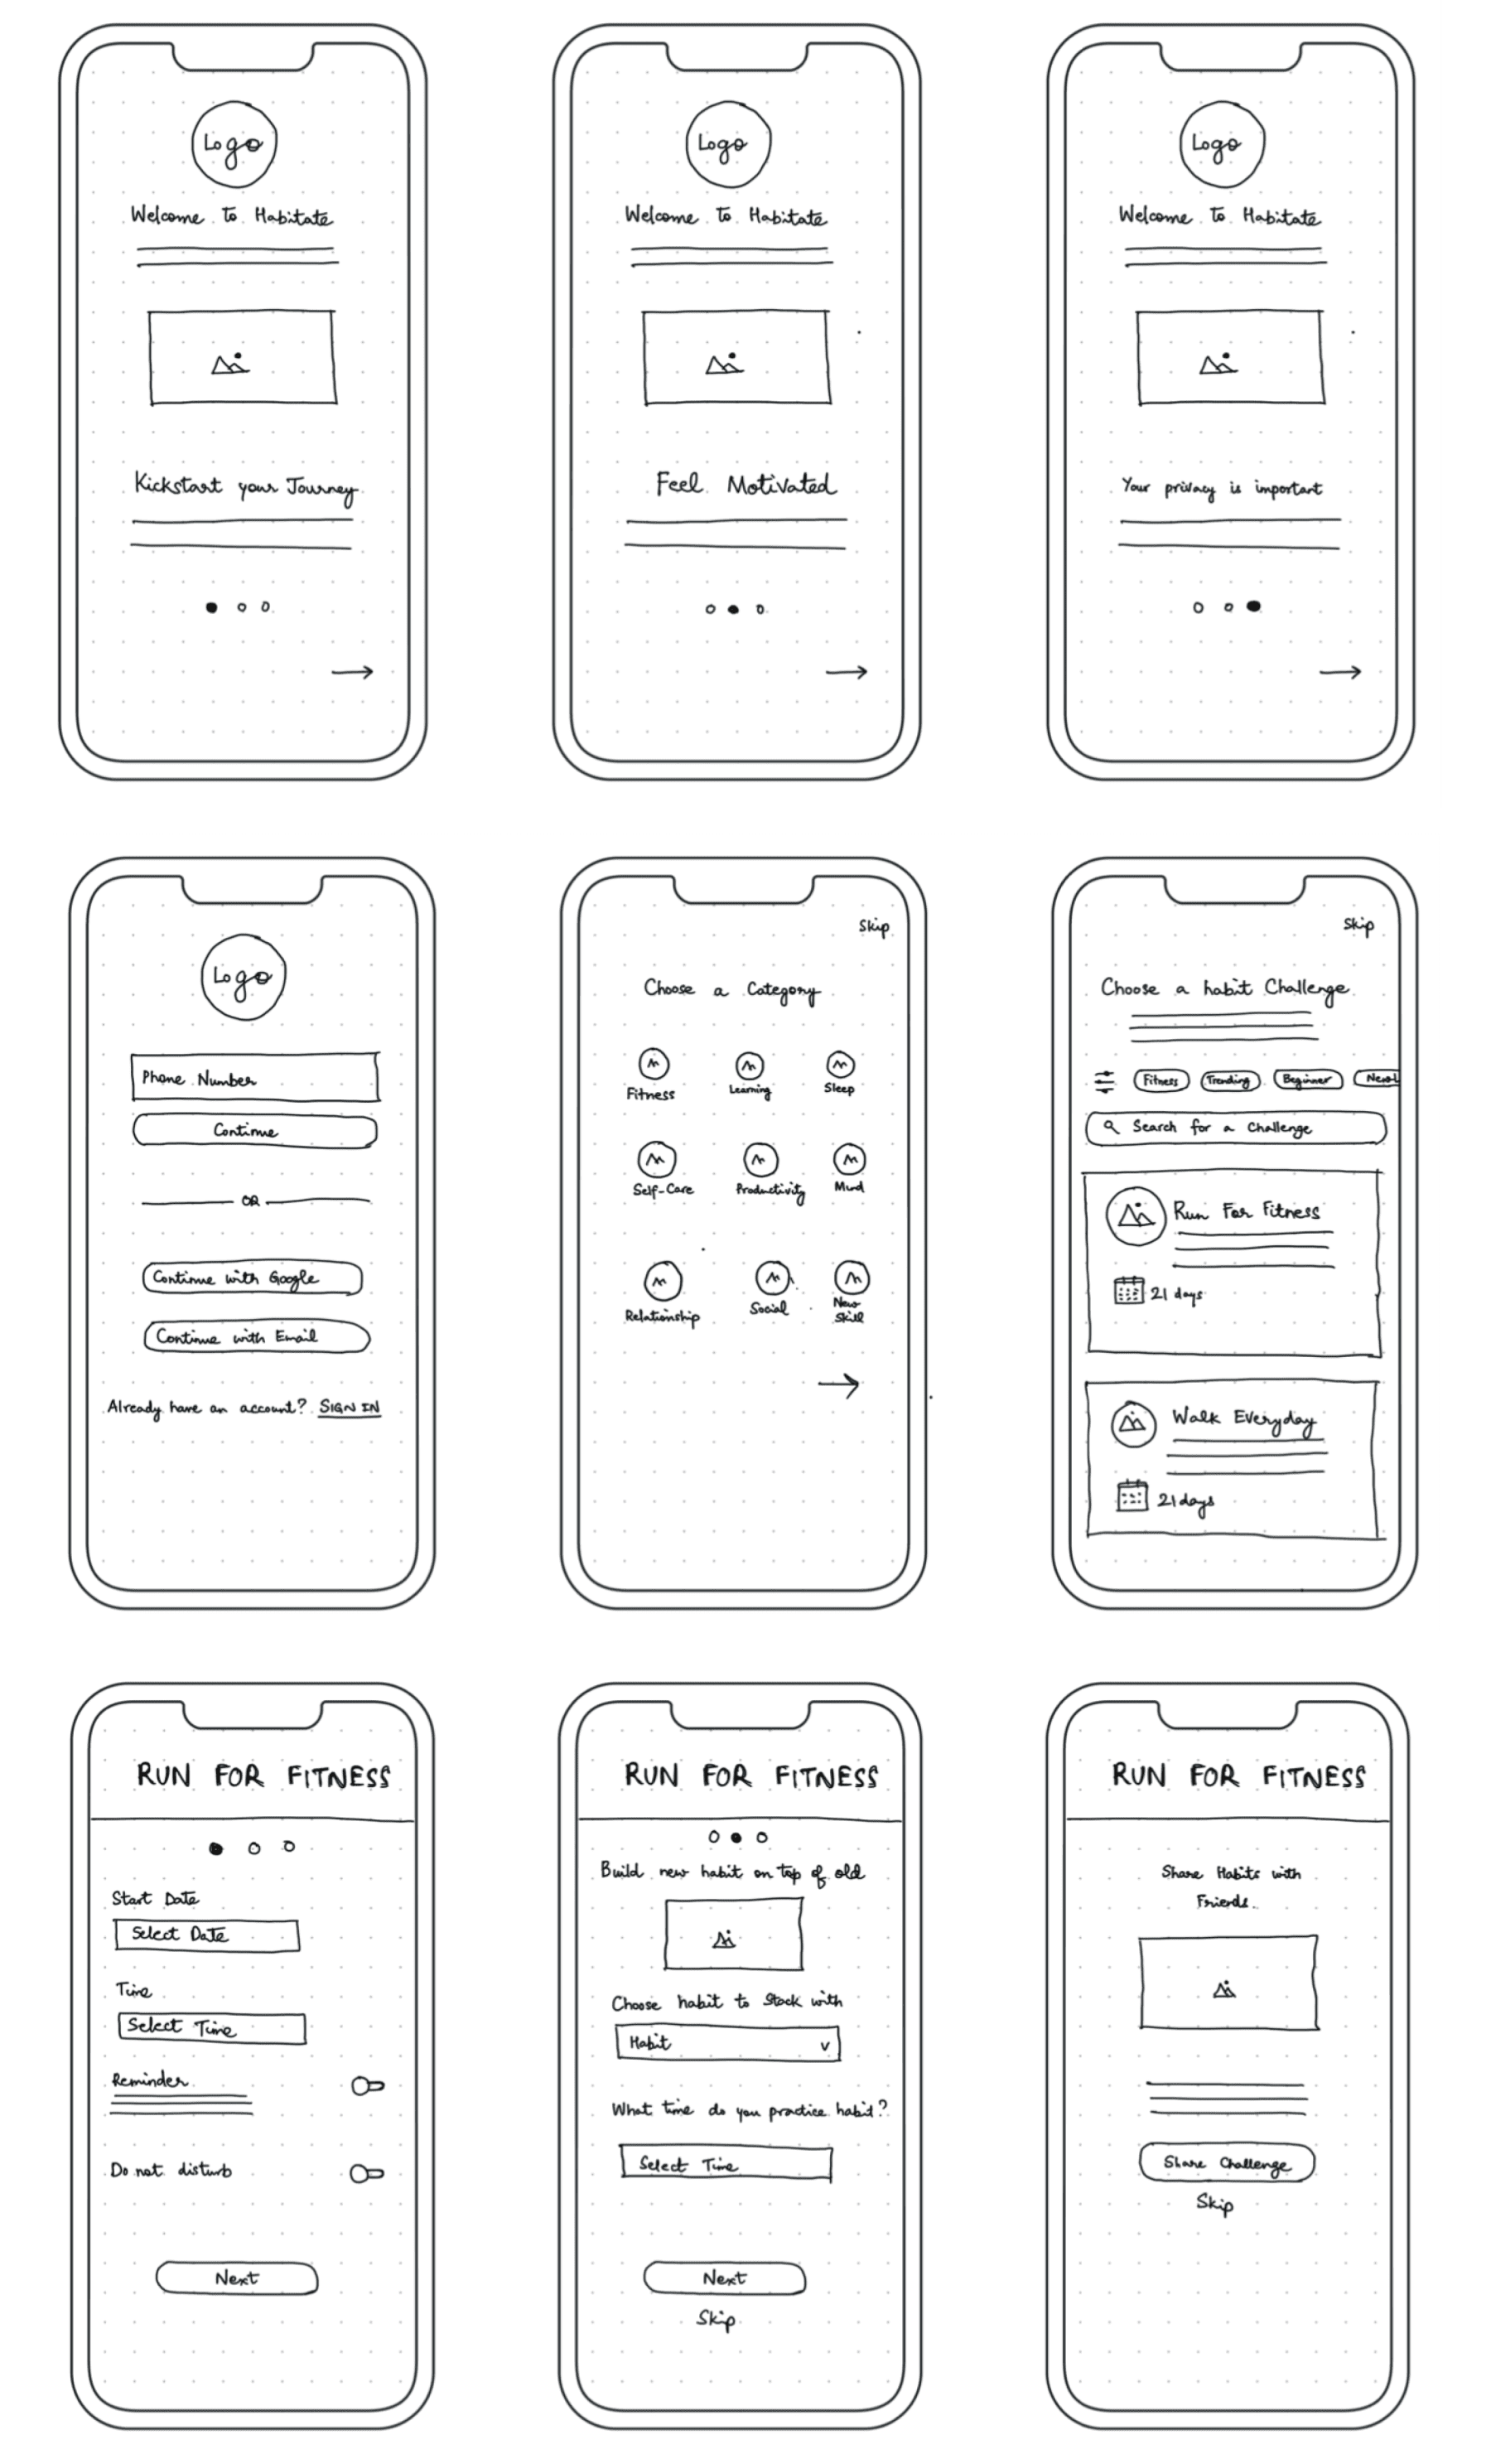 Onboarding sketches